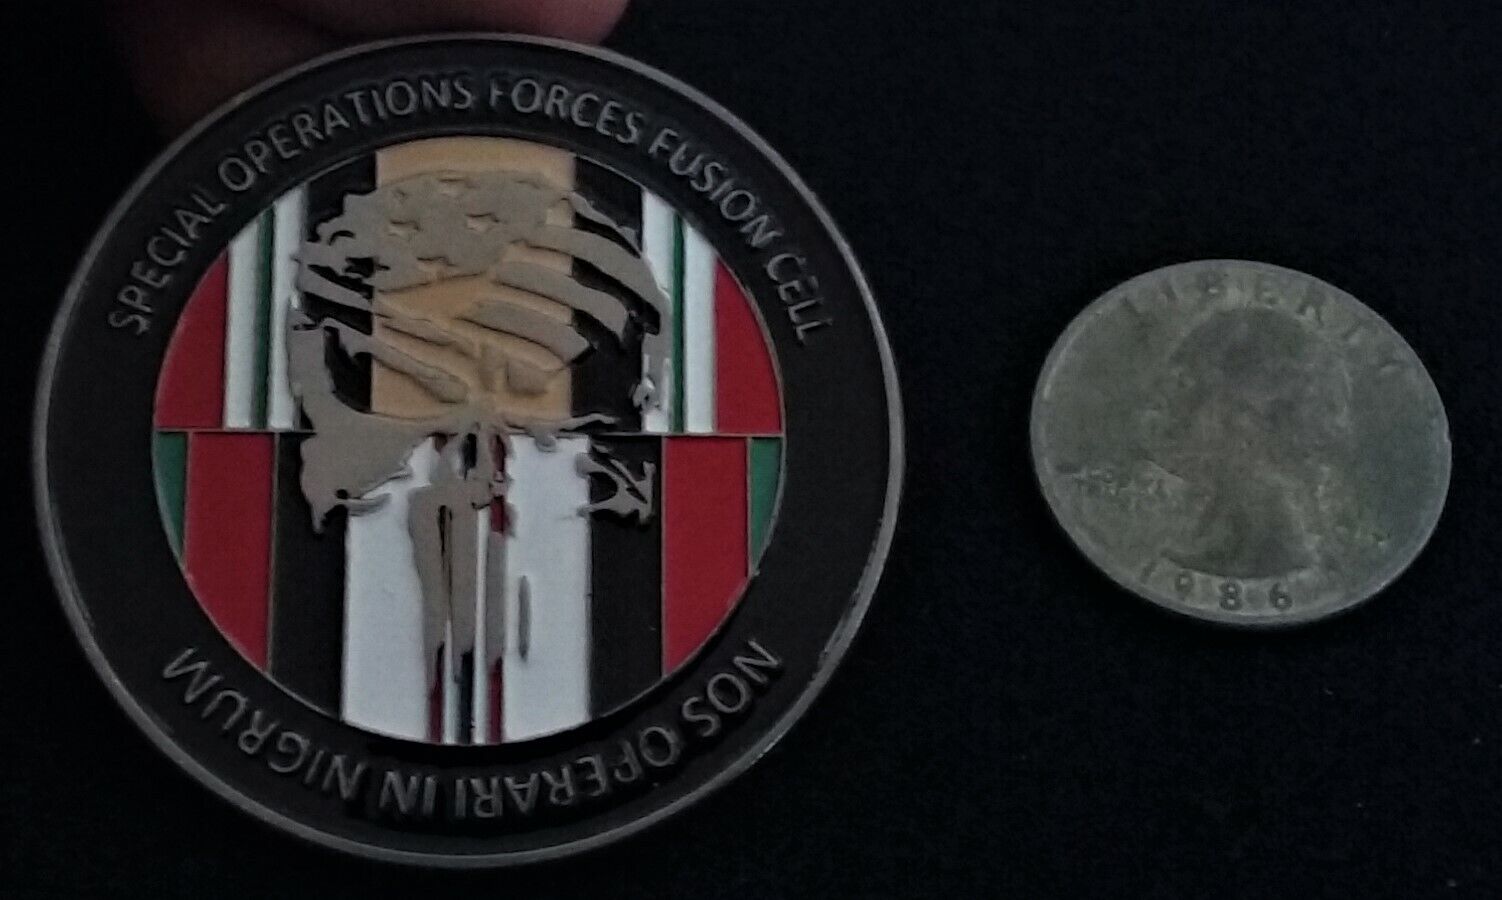 Special Operation Fusion Cell OEF OIF NSA CIA FBI SEAL Blackwater Challenge Coin